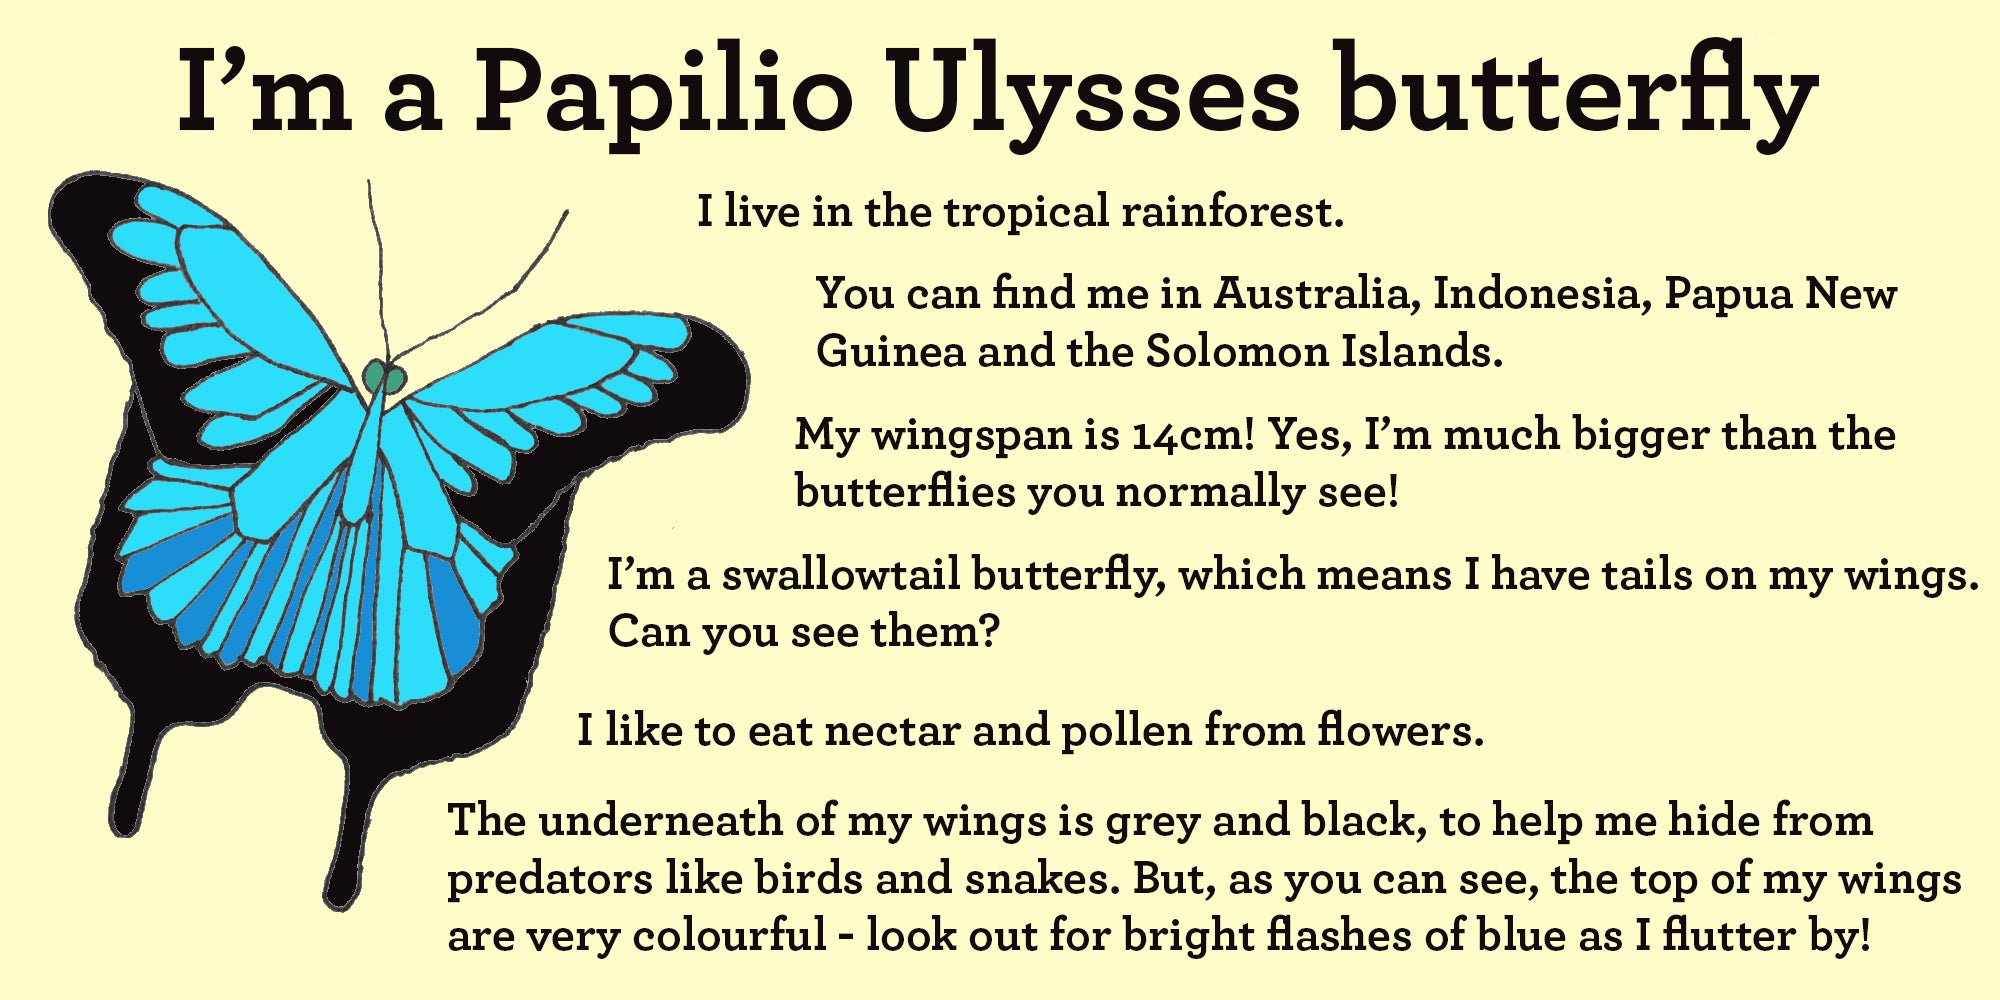 ulysses butterfly facts